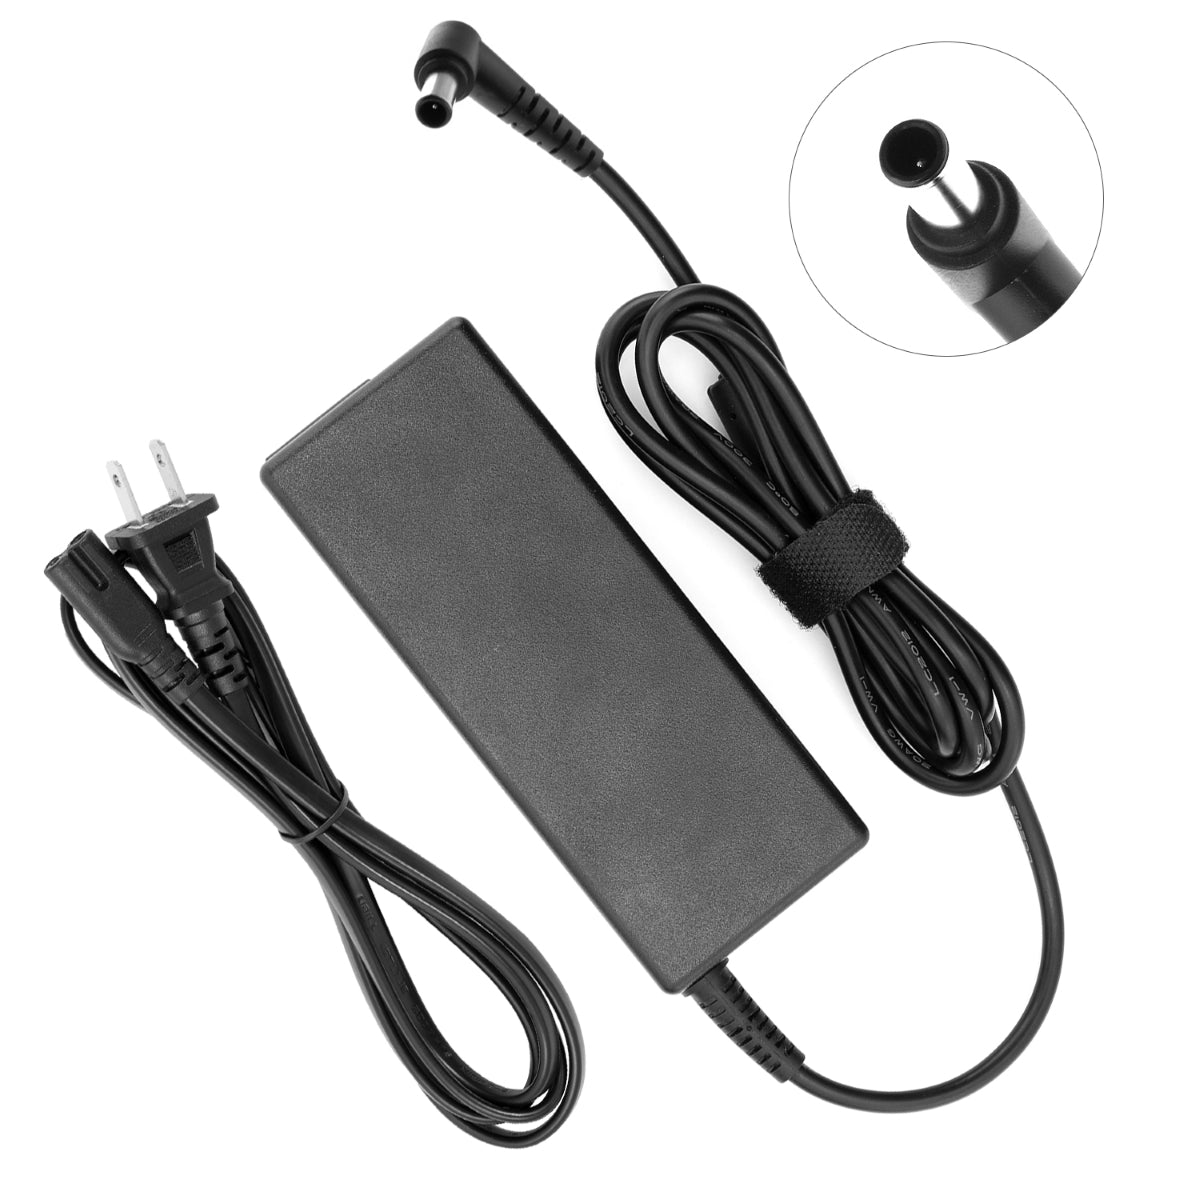 Compatible Charger for Sony Vaio PCG-71314L